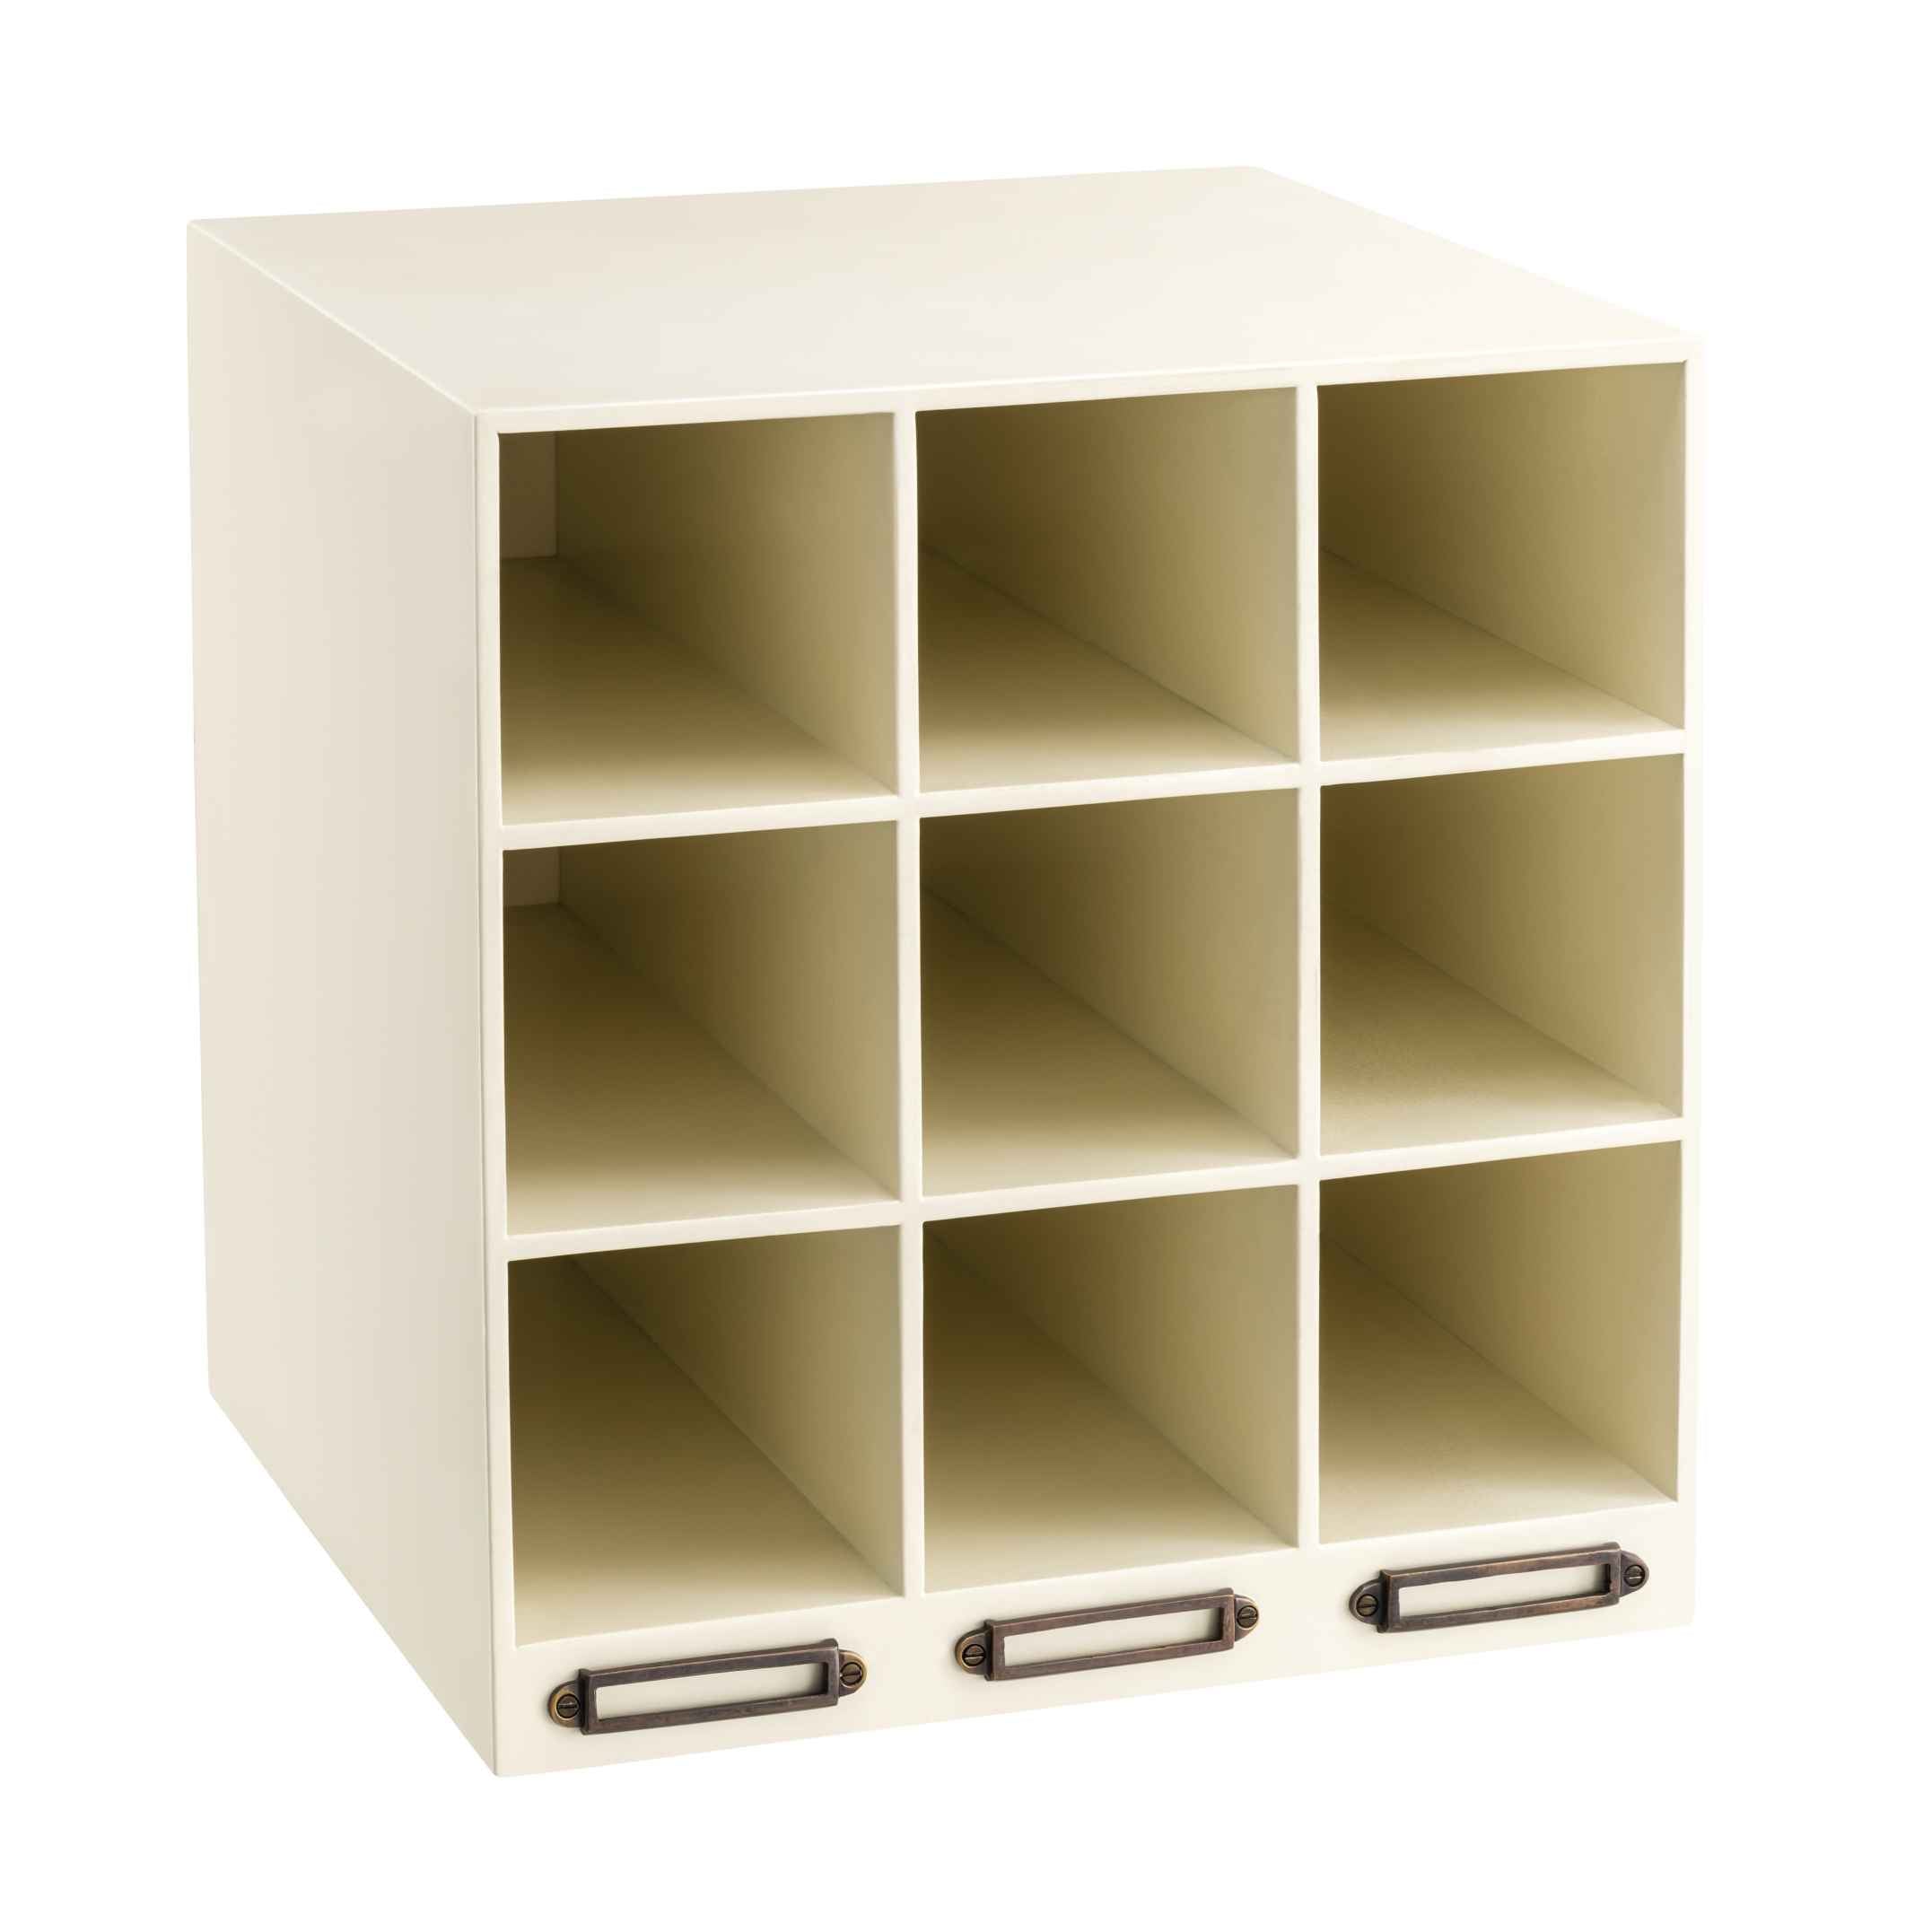 Insert box 1 Wine Rack White By Authentic Models